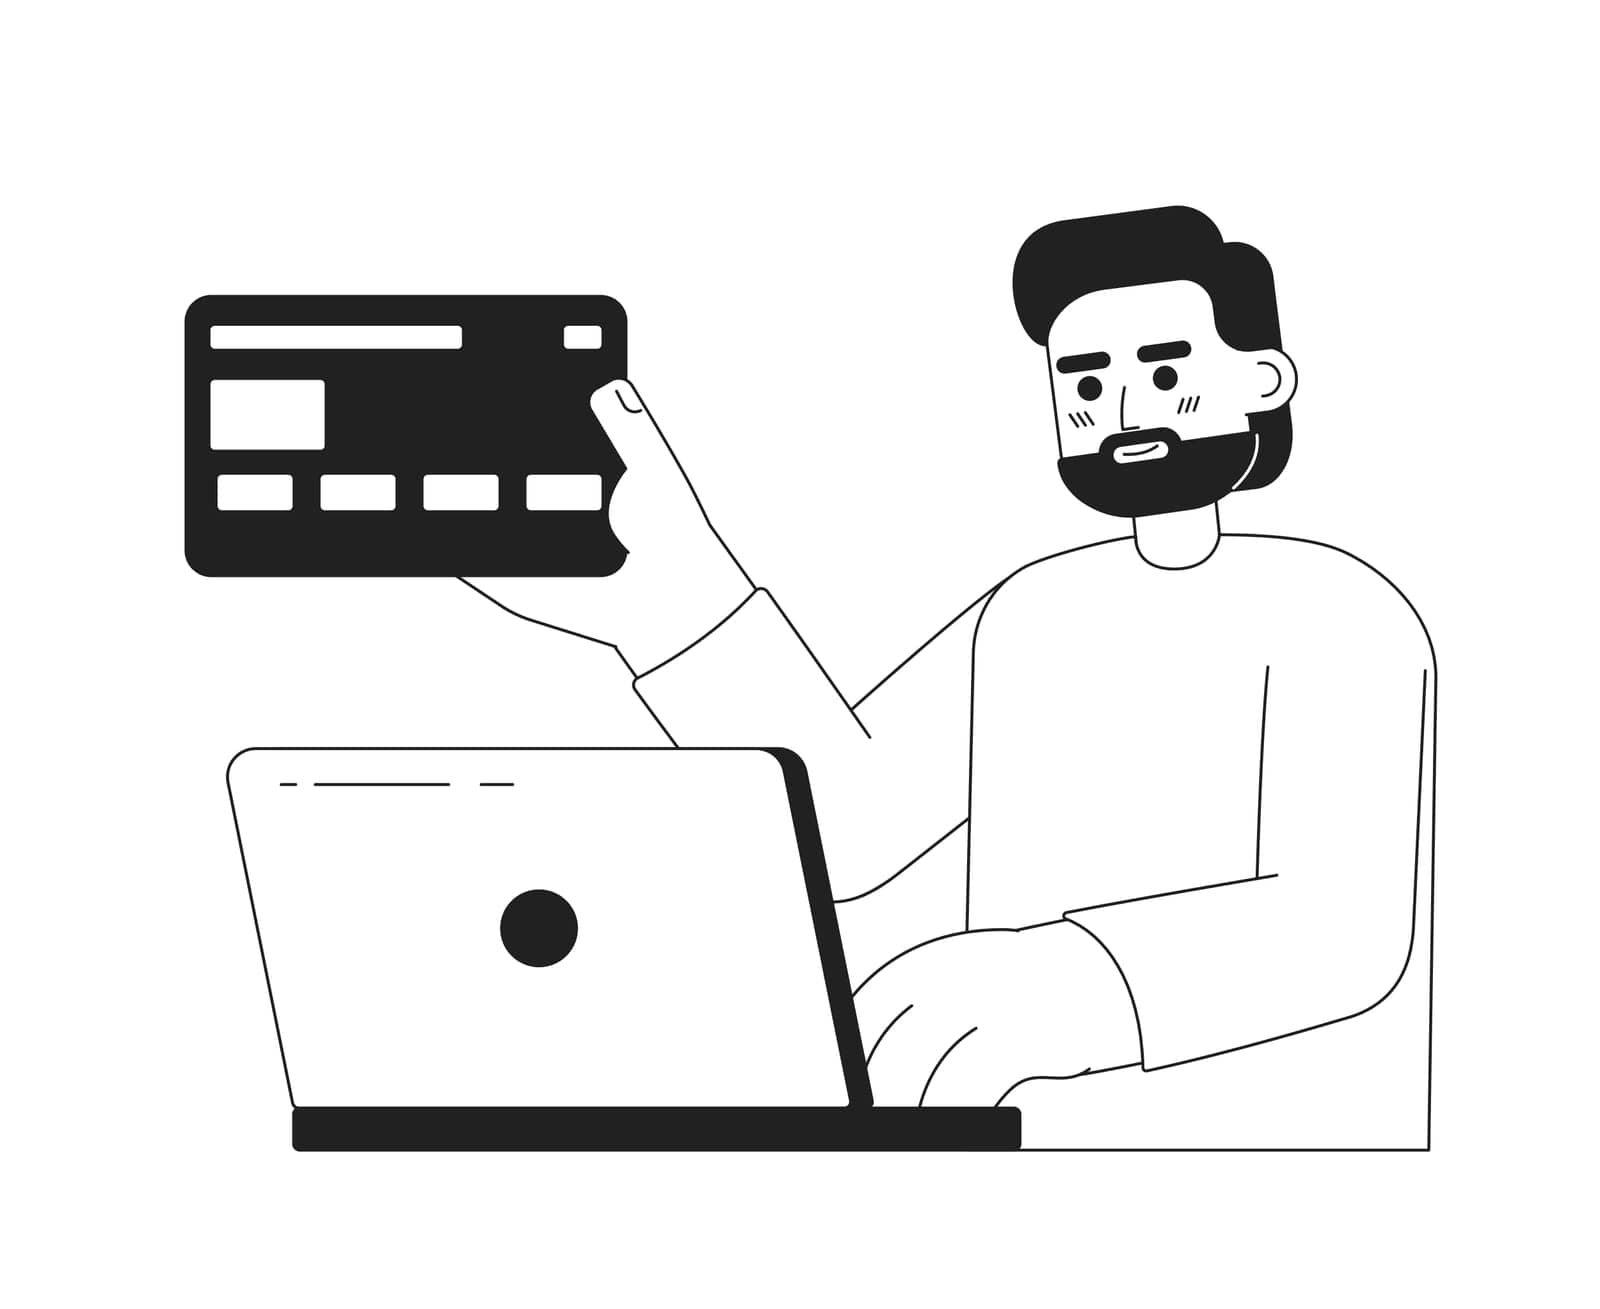 Checkout in online store monochrome concept vector spot illustration. Editable 2D flat bw cartoon character for web UI design. Male customer with laptop, card purchasing goods hand drawn hero image